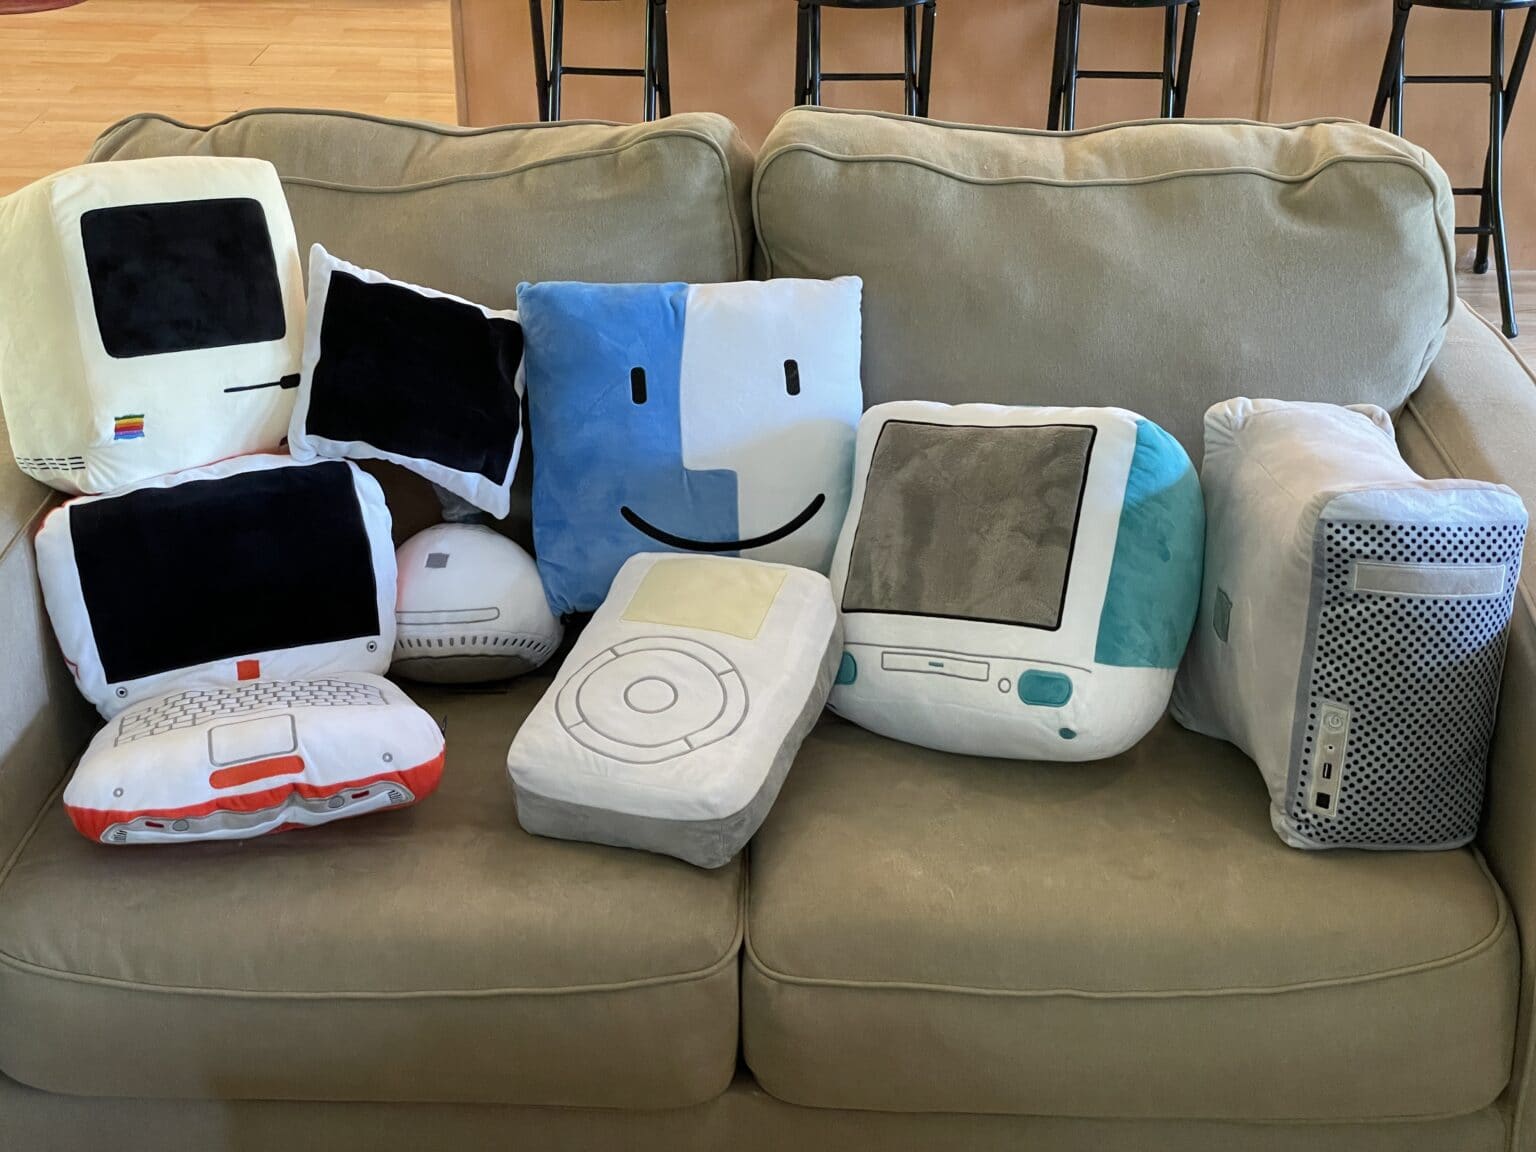 A collection of Throwboy pillows sitting on a dingy tan couch